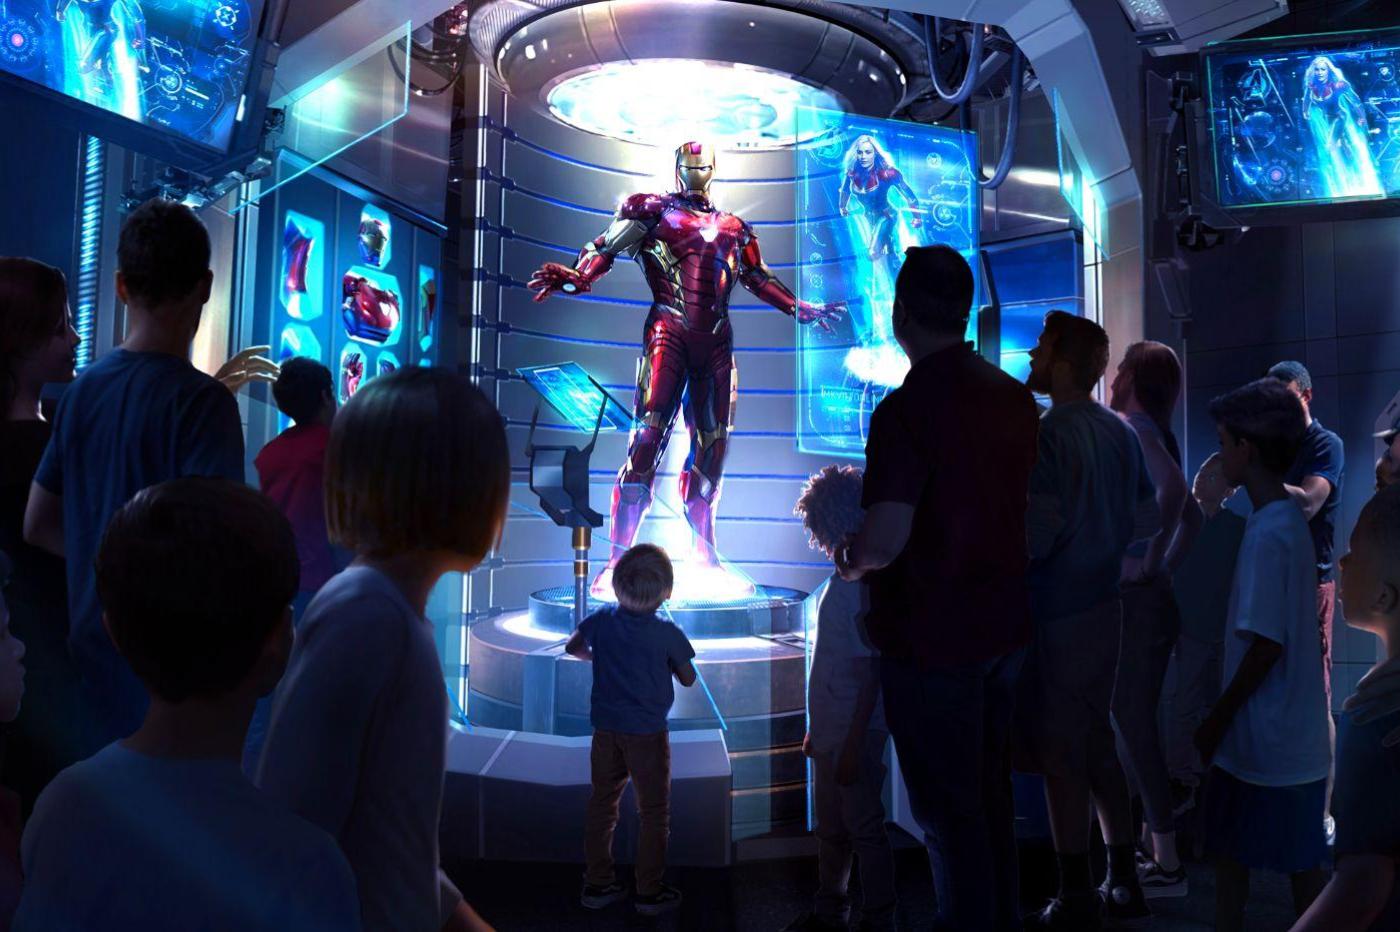 Promotional image for the Avengers Assemble Flight Force attraction showing Iron Man during the attraction's preshow